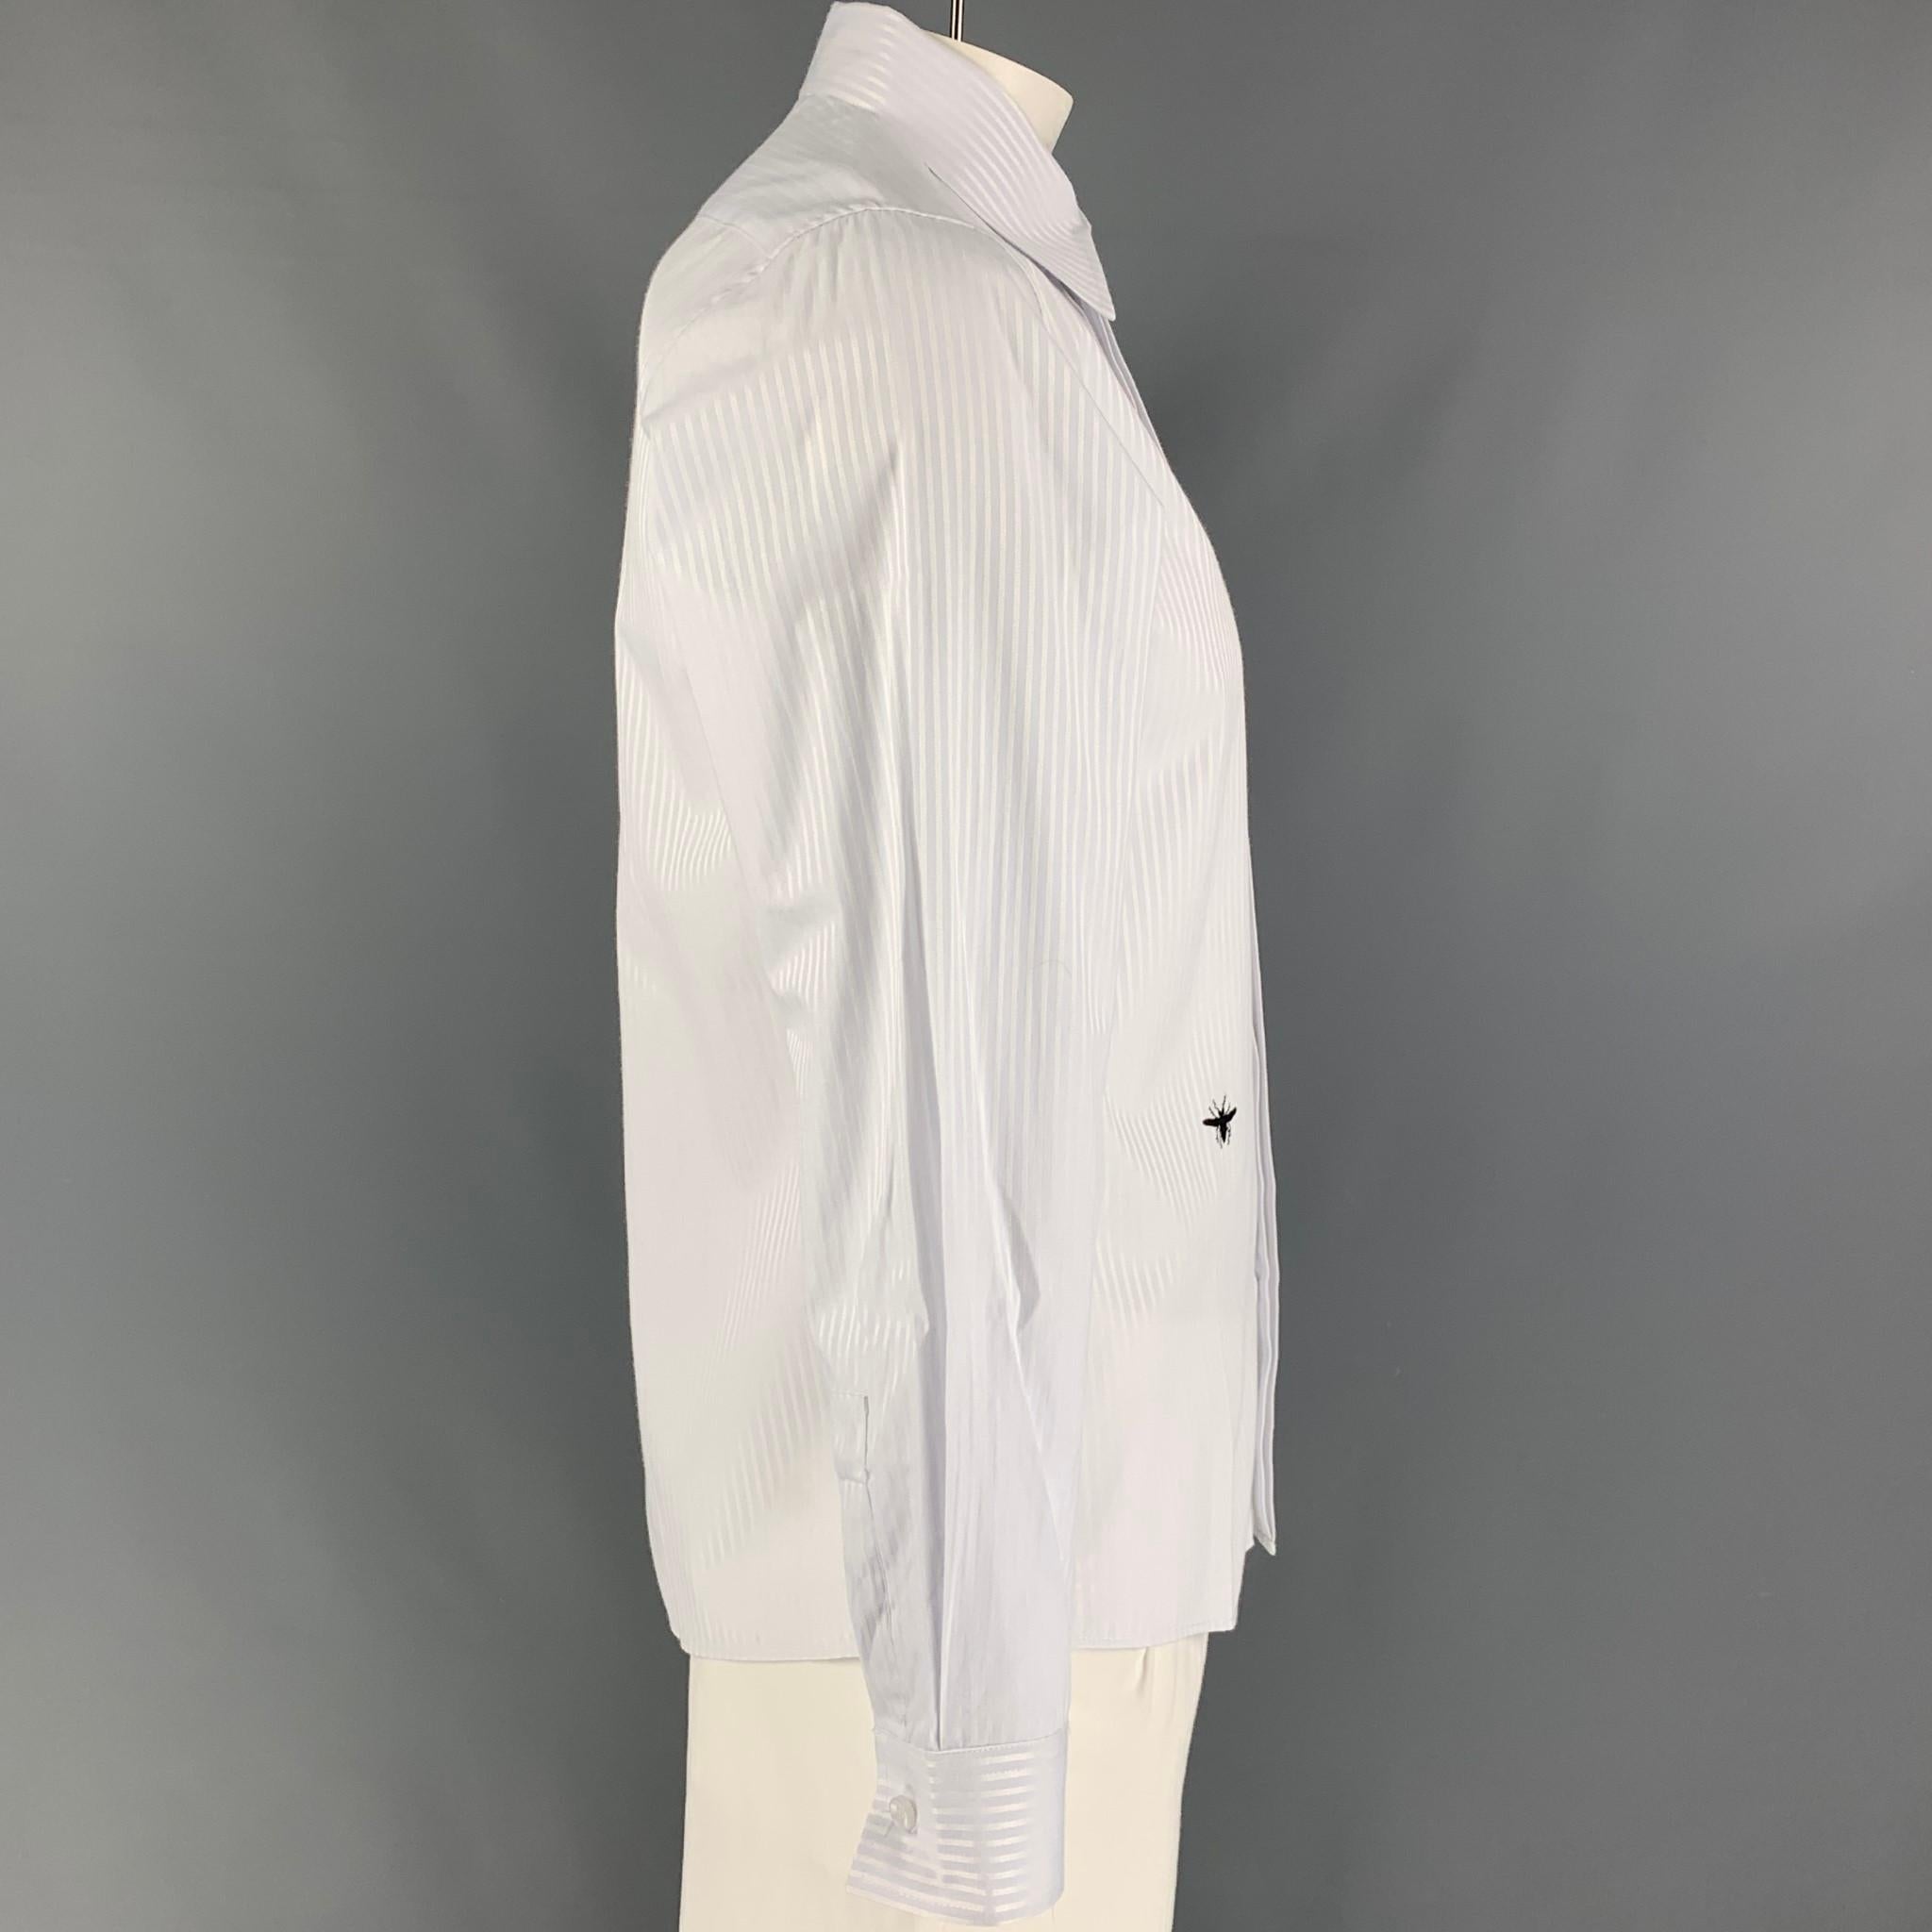 DIOR long sleeve shirt comes in a white & light blue stripe material featuring a spread collar, embroidered bee, and a hidden placket closure. Made in Italy. 

Very Good Pre-Owned Condition.
Marked: XL
Original Retail Price: